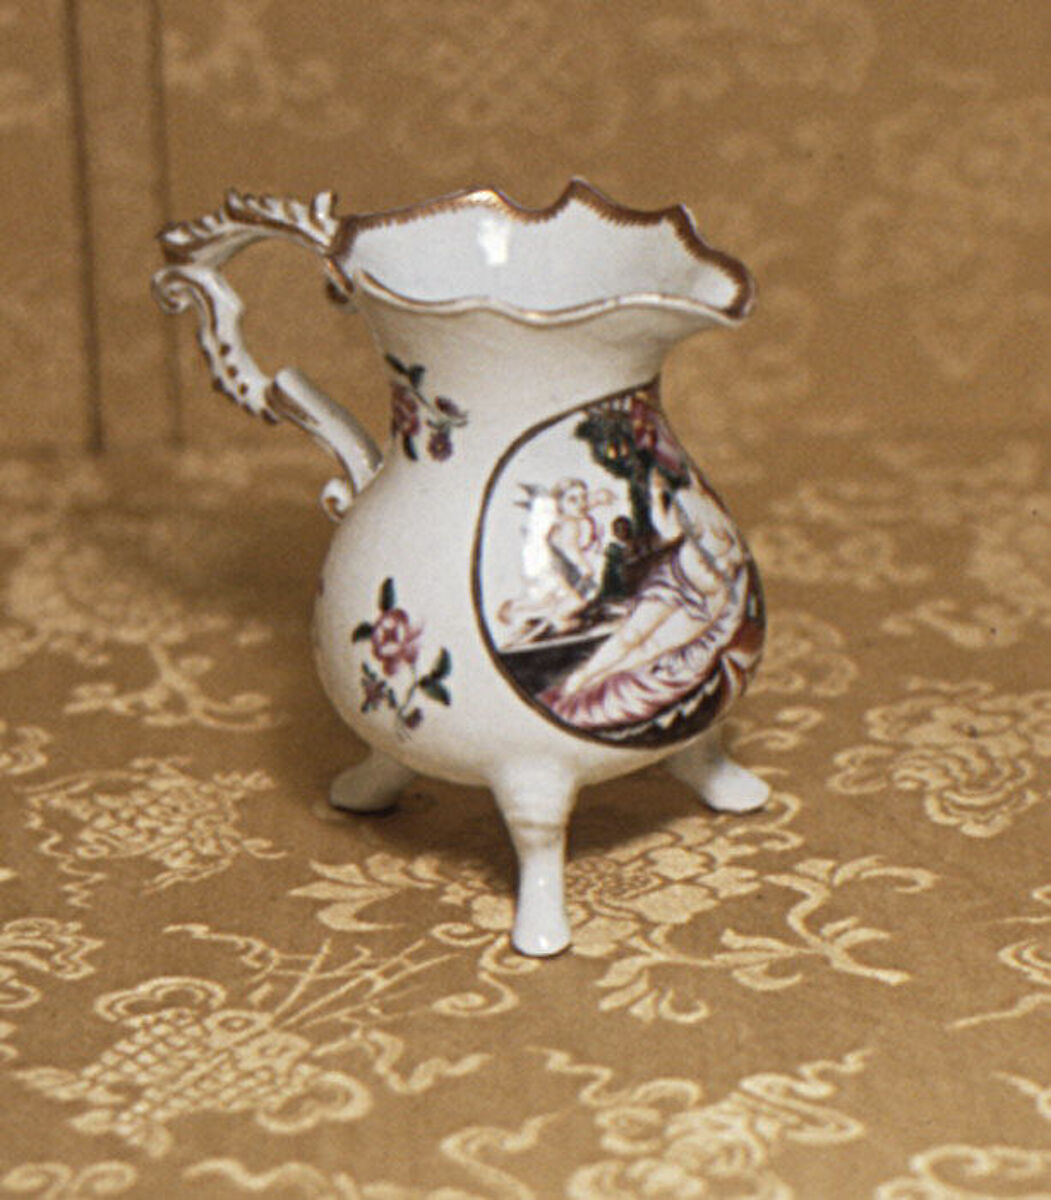 Creamer (part of a service), Hard-paste porcelain, Chinese, for Continental European market 